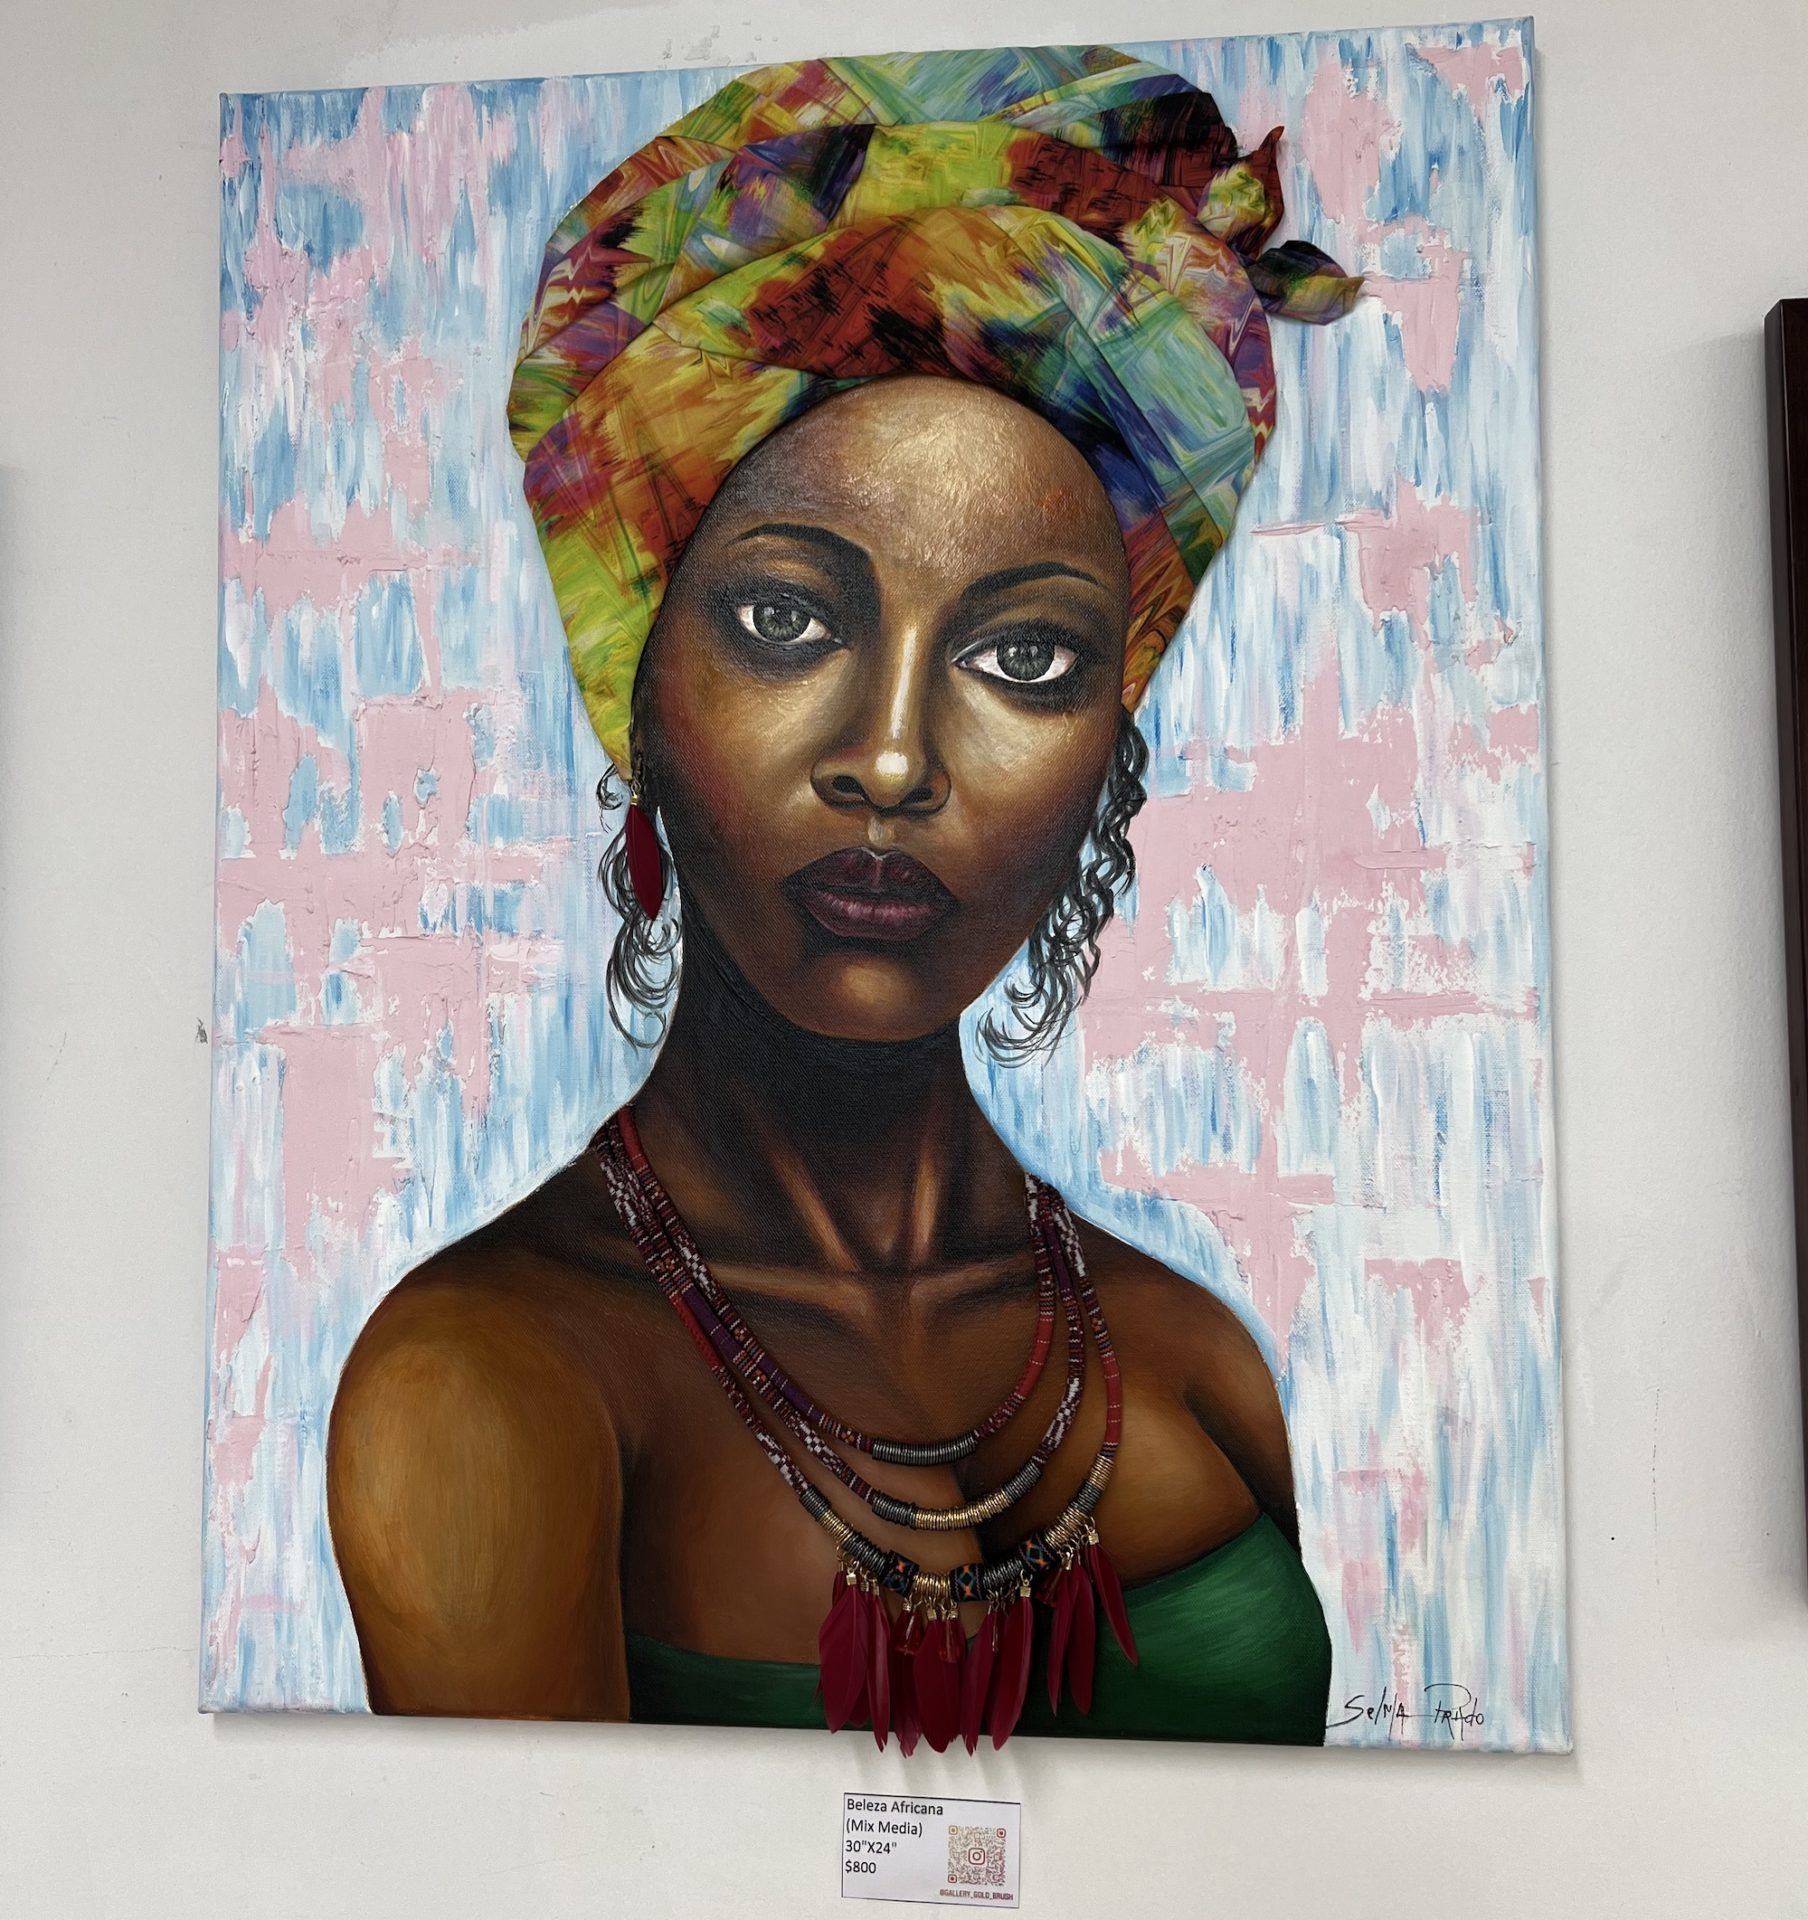 Mixed media painting by Selma Prado. A front view bust of a black woman wearing a green strapless top and a colorful turban. The turban and necklace are actual materials placed on the canvas. The background is abstract brush strokes of light pink and blue.